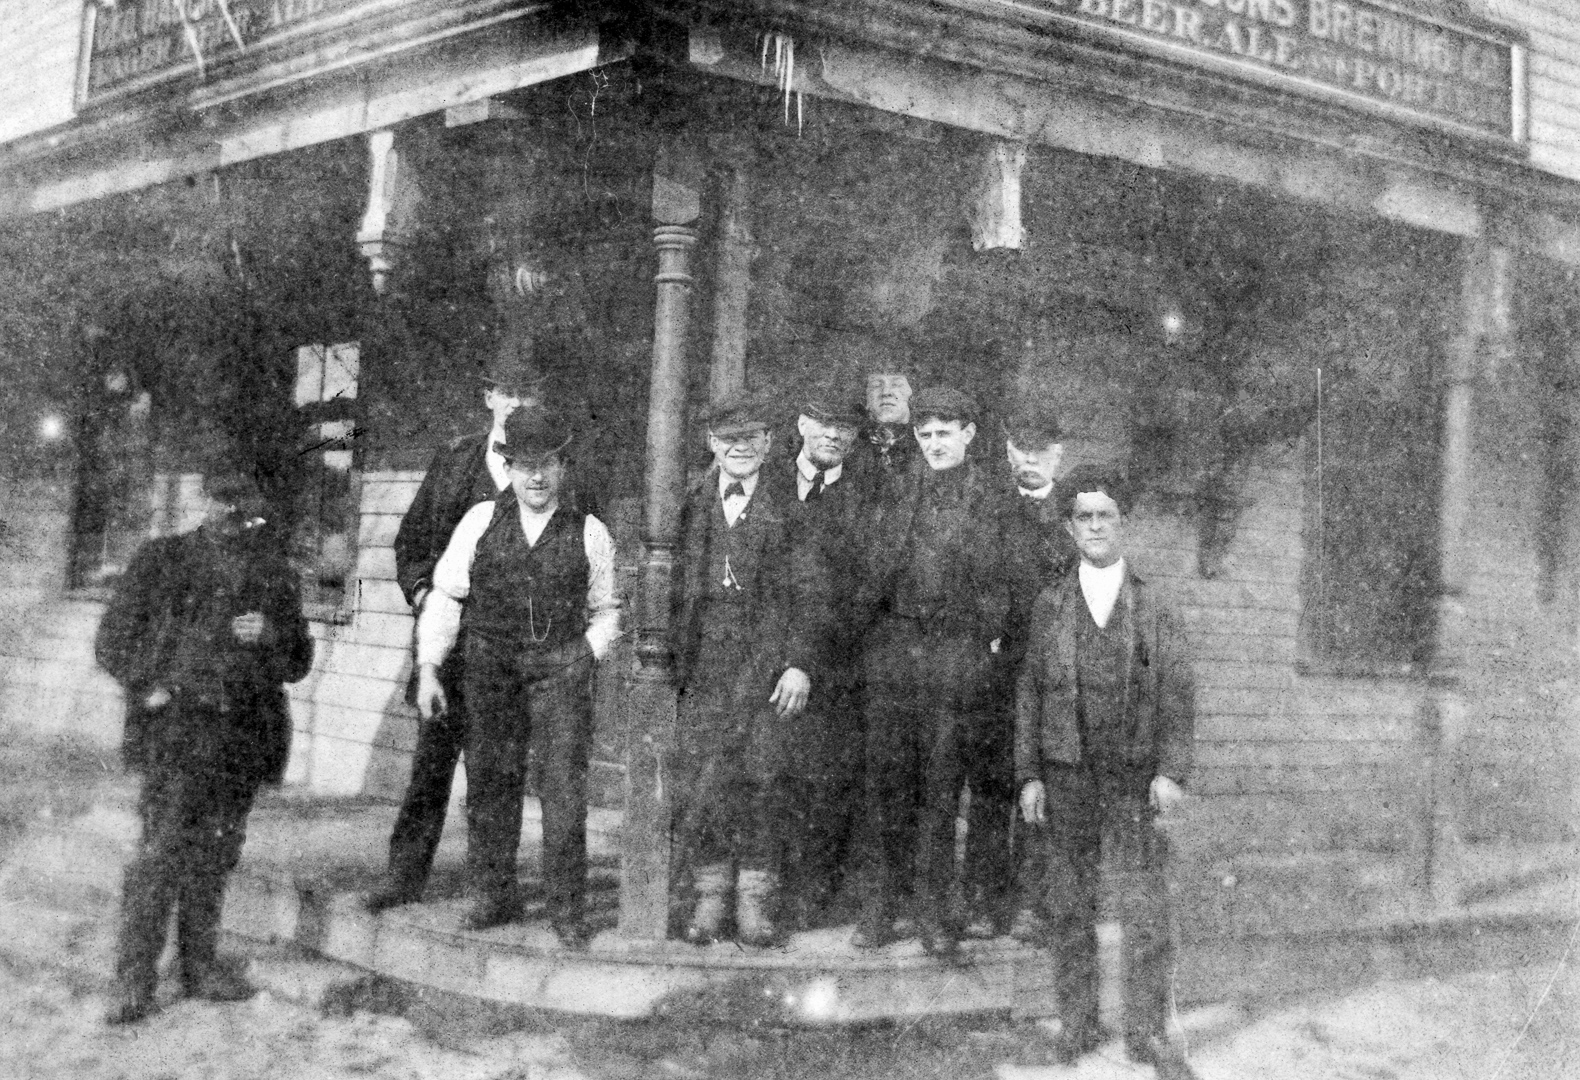 Probably brothers George "Frank", Daniel "Coady" and John S. McManus (in front from post to right); brother Henry McManus may be on far left